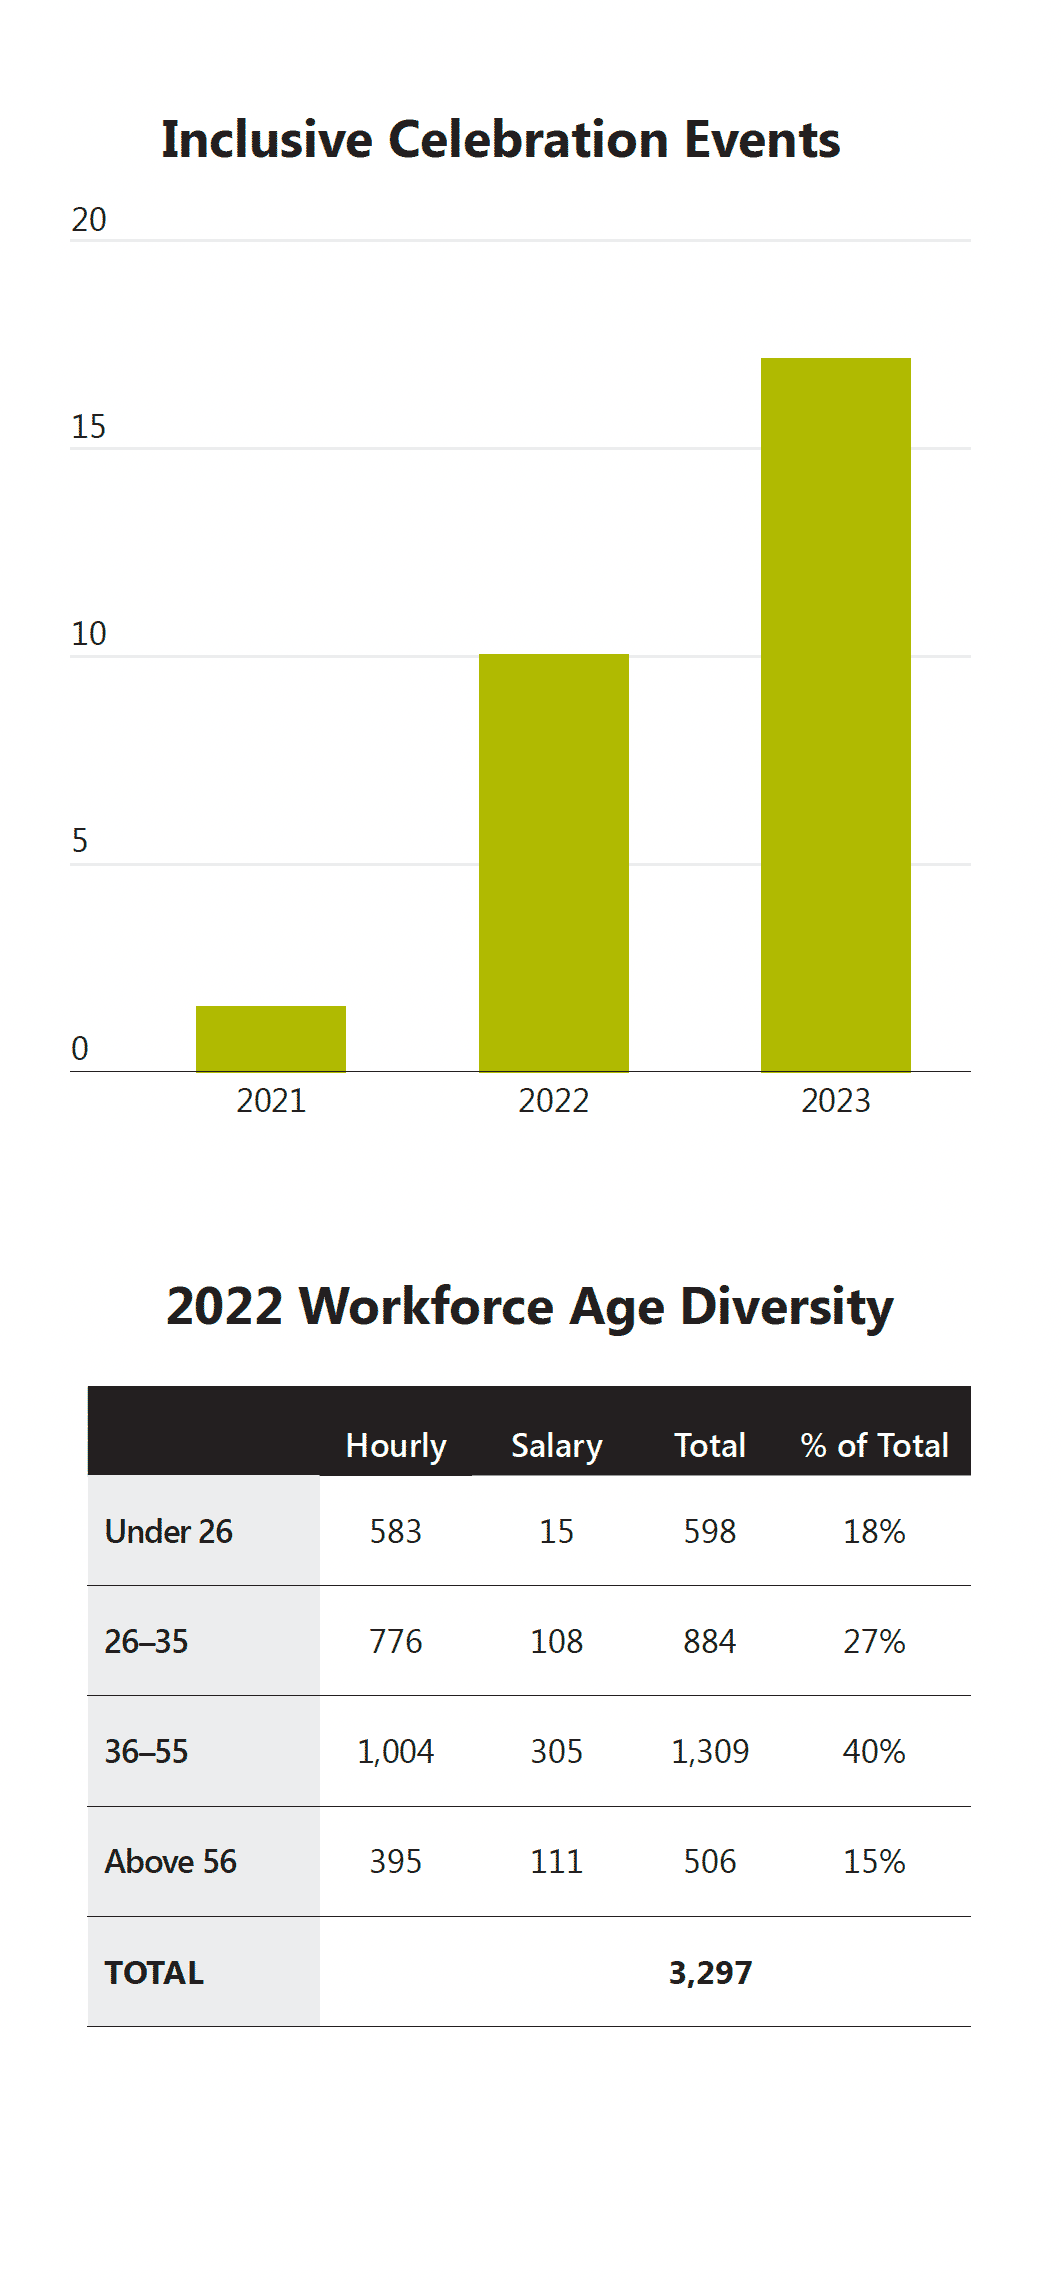 charts showing inclusive celebration events and workforce diversity